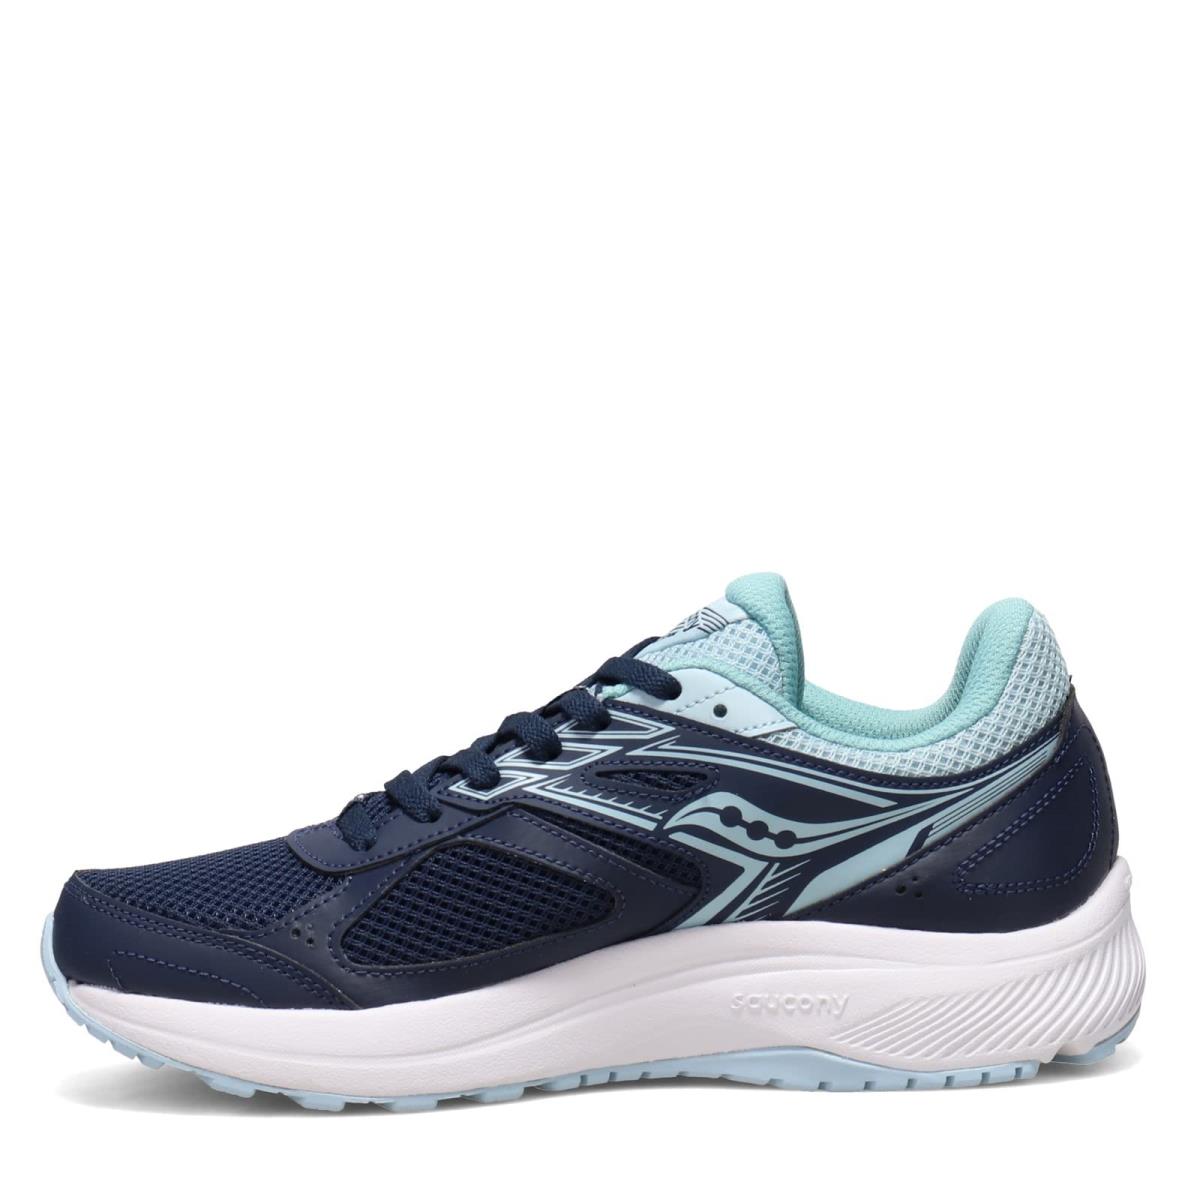 Saucony Women`s Cohesion 14 Road Running Shoe Navy/Light Blue